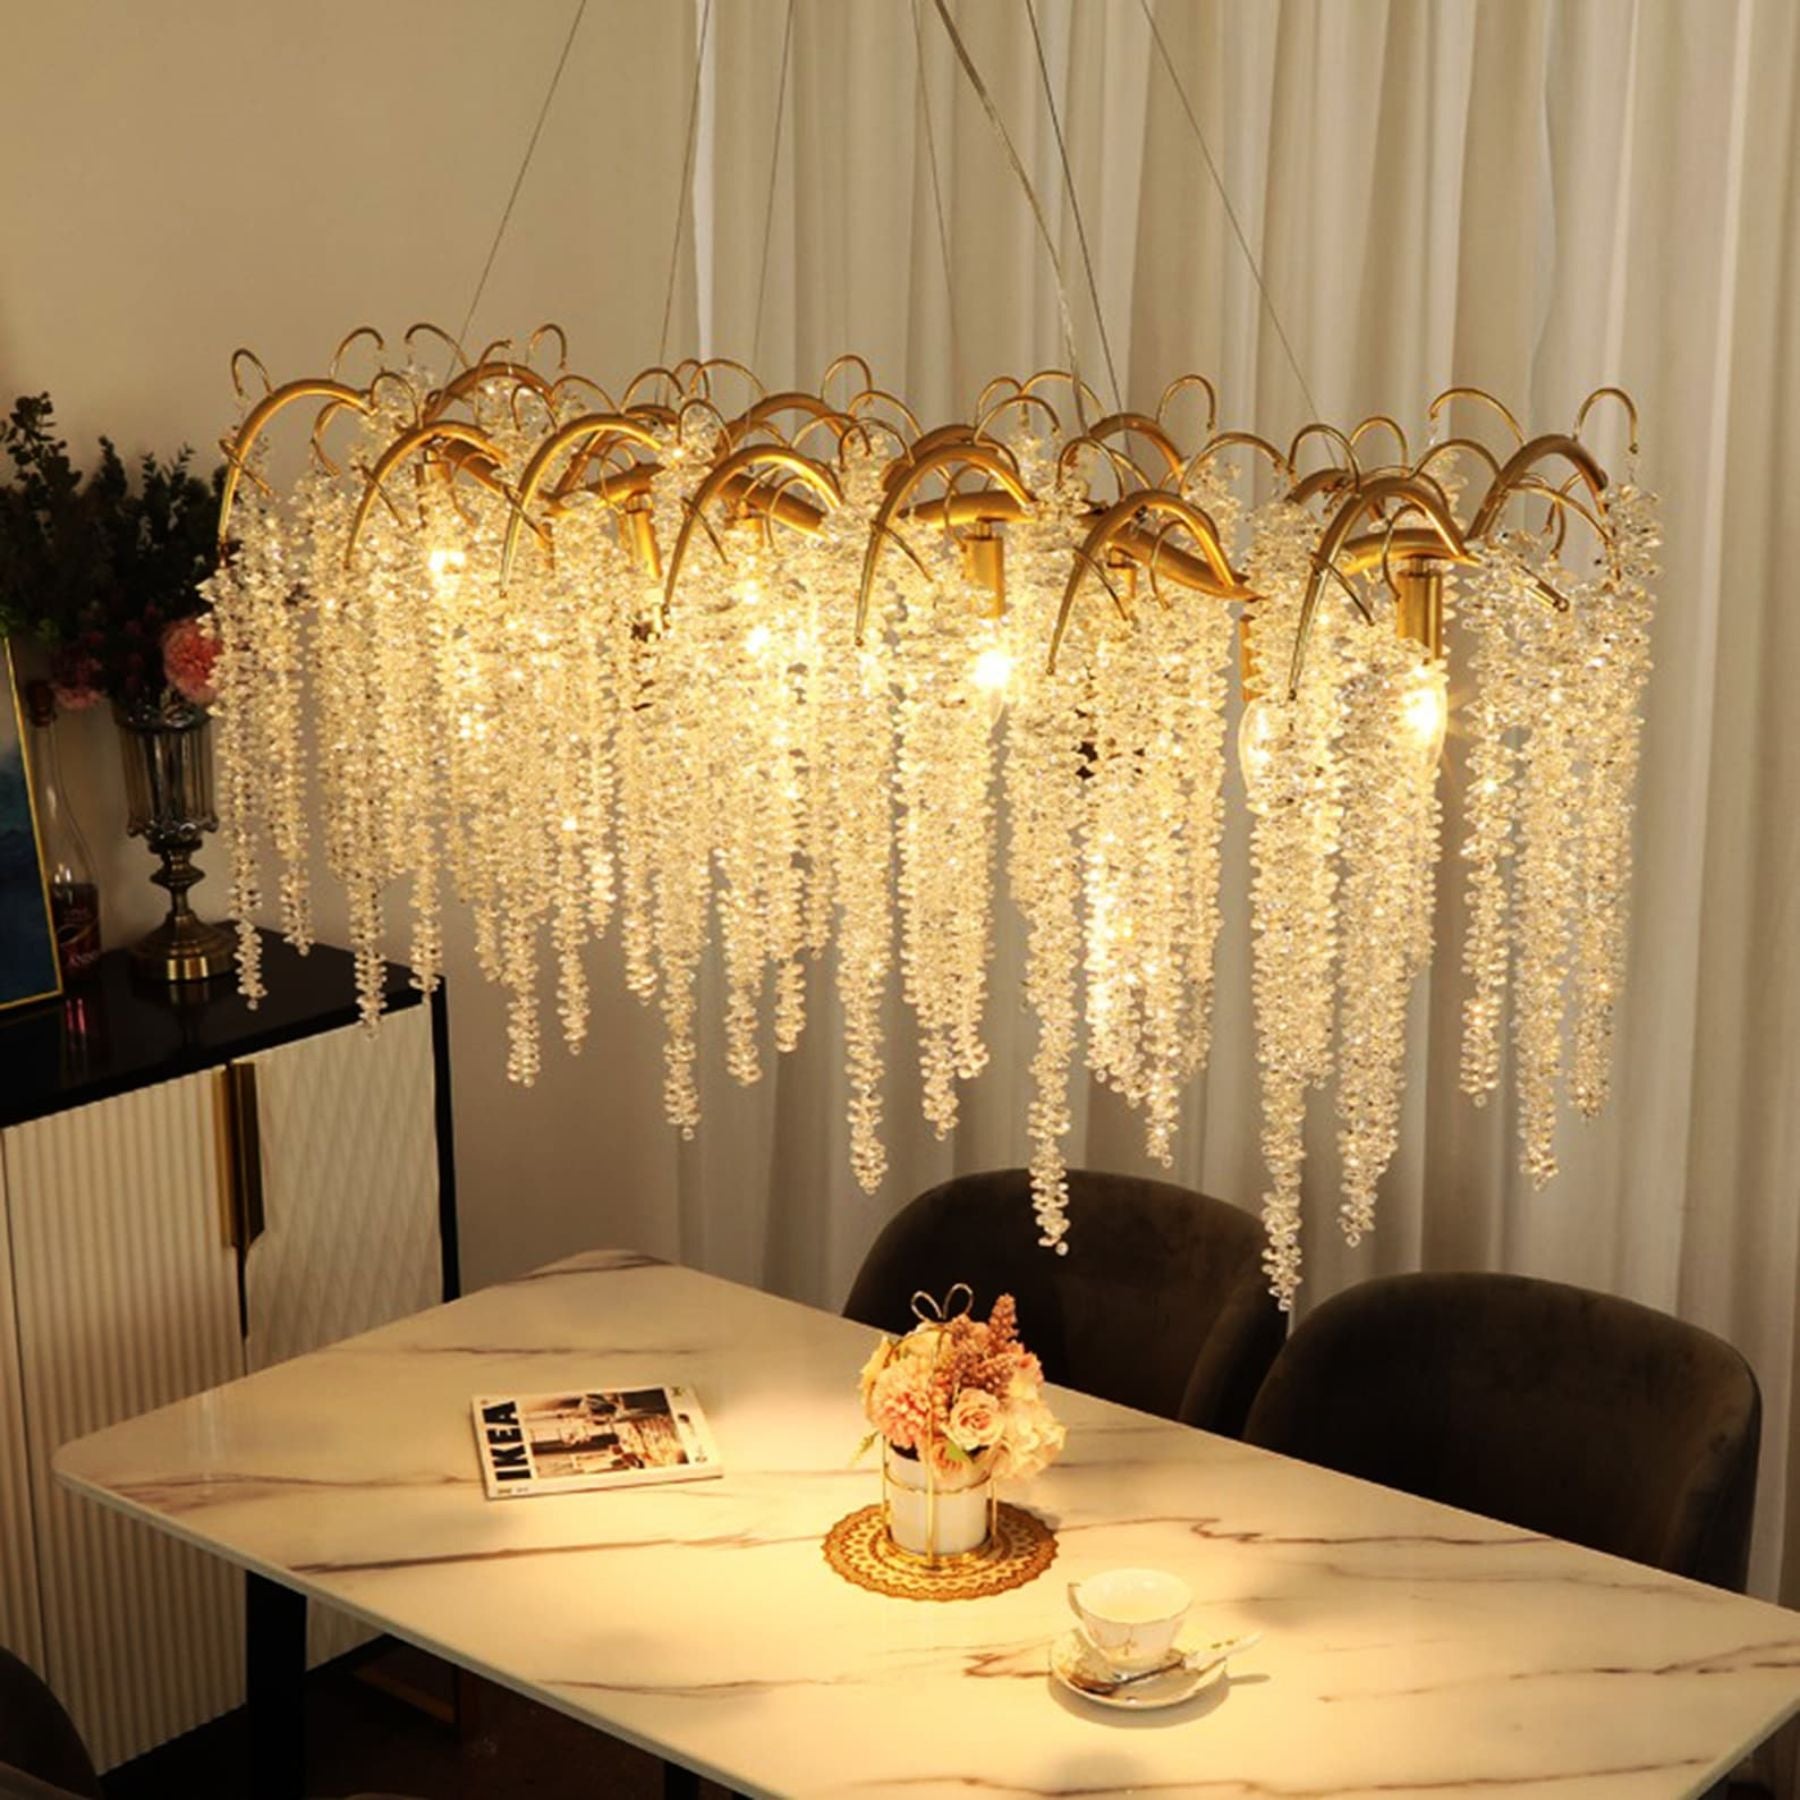 the sparkling and captivating orchid crystal pendant creates a warm and soft glow infusing a feeling of cozy comfort into the living room or dining room